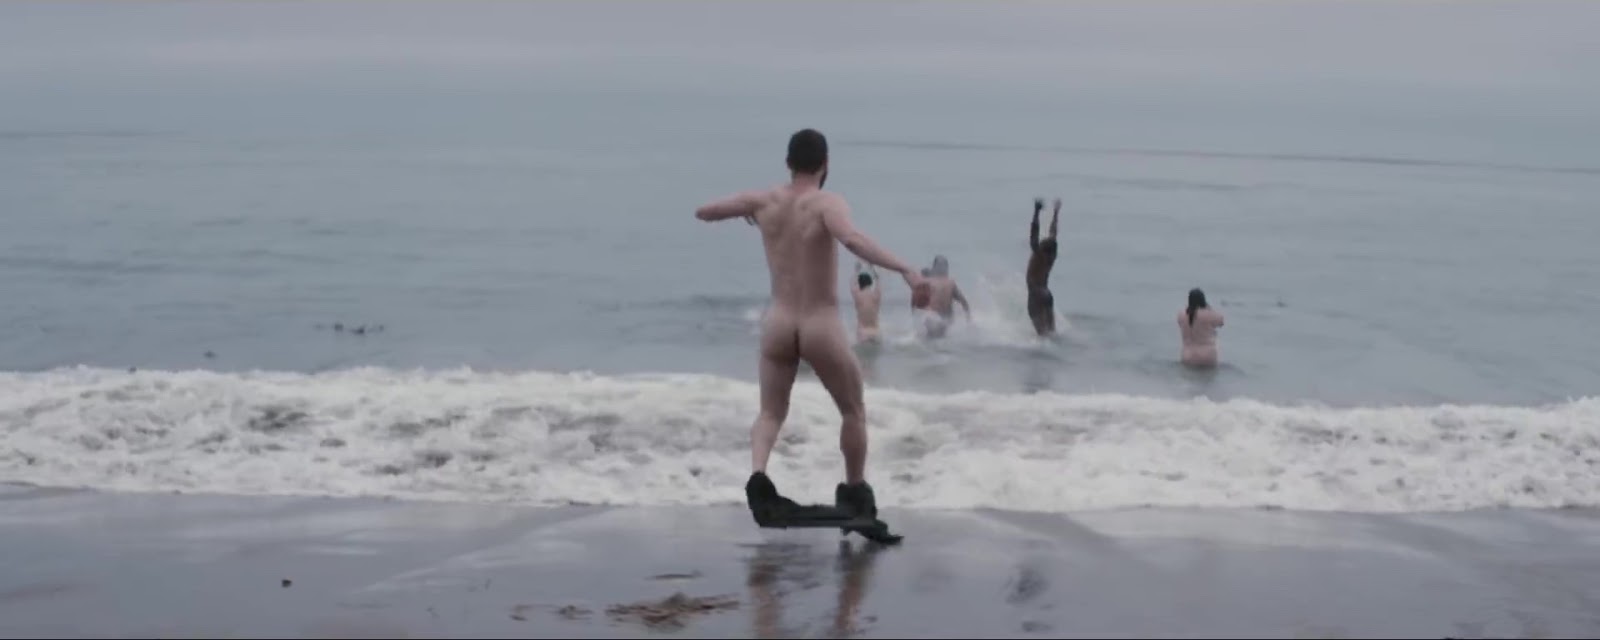 Mike Posner nude in Be As You Are.